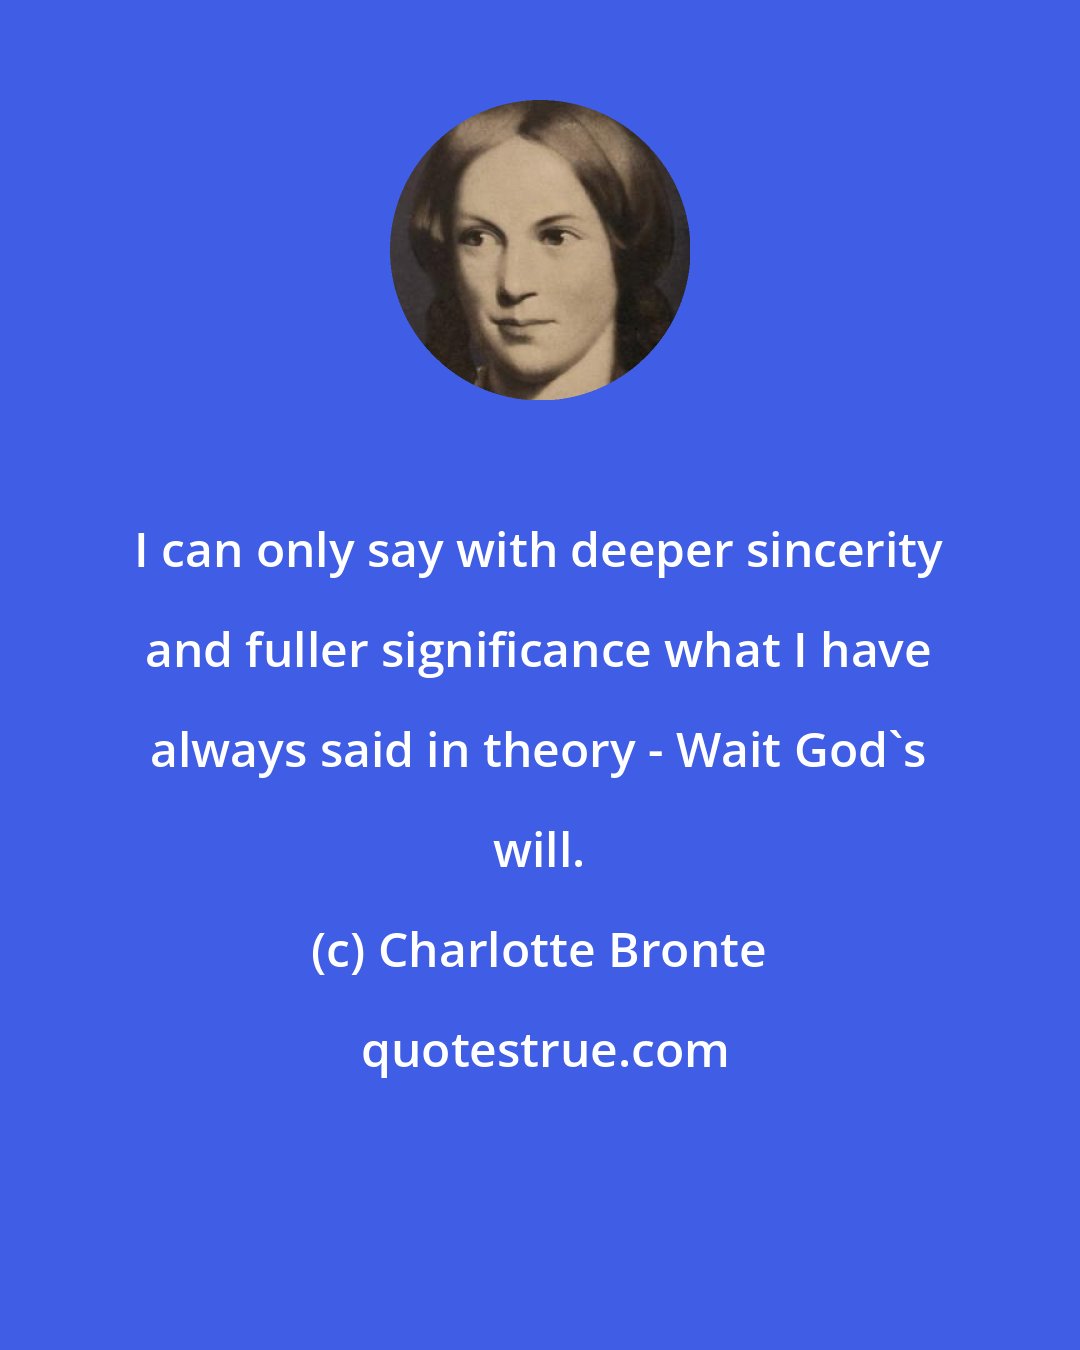 Charlotte Bronte: I can only say with deeper sincerity and fuller significance what I have always said in theory - Wait God's will.